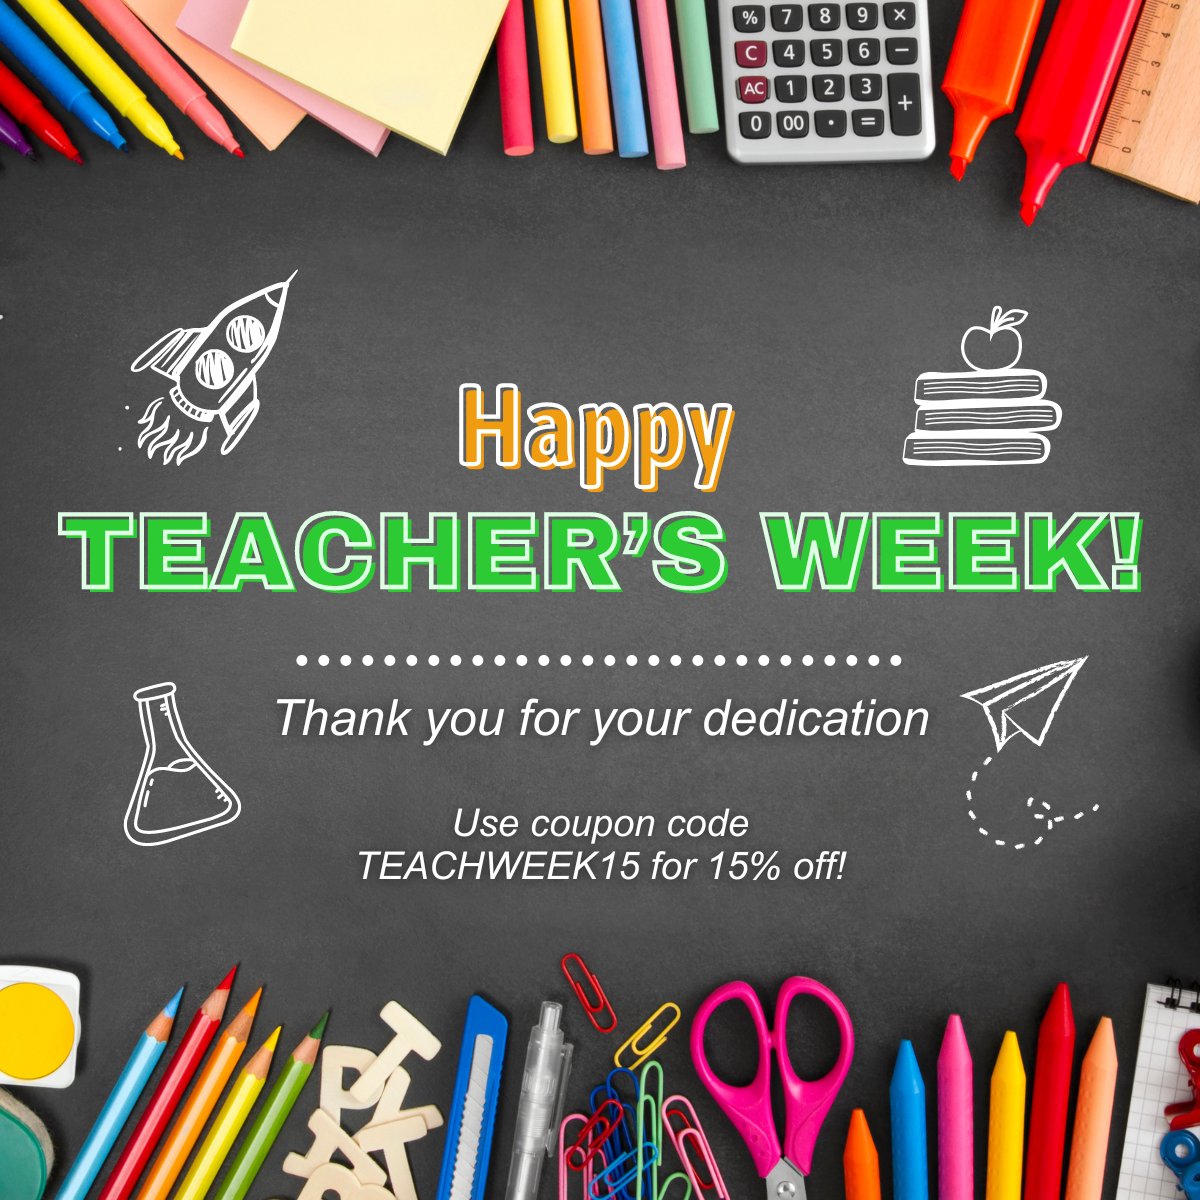 🍎 Happy Teacher's Week! 📚 As a token of our appreciation, enjoy 15% off on CareerLearning's webinars with code TEACHWEEK15. Valid till 05/10/24, 11:59 PM EST. Explore our curated catalog for your professional growth and classroom success. Thank you for all you do! #TeachersWeek